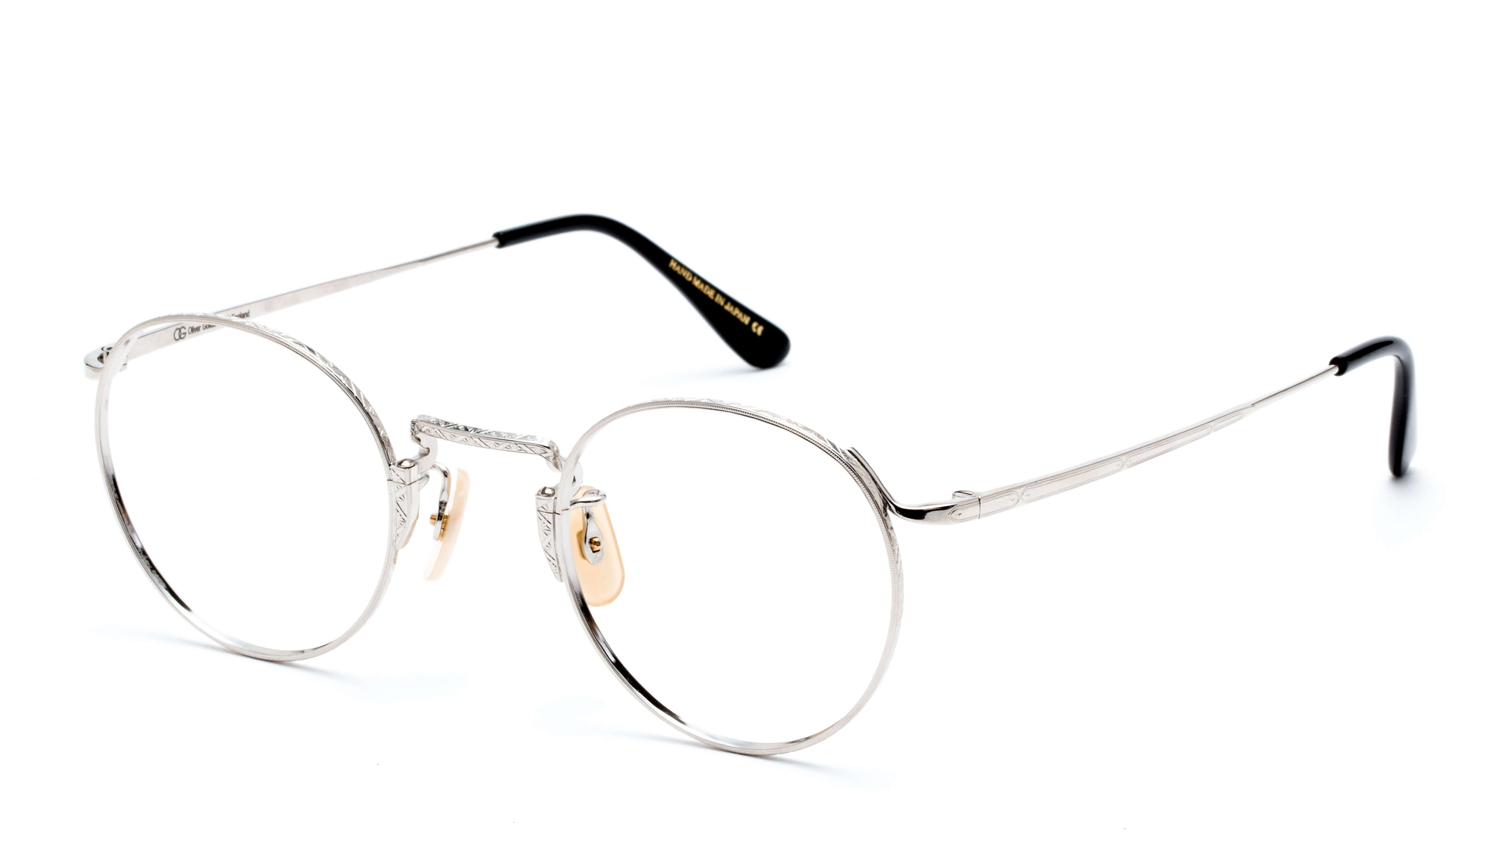 Oliver Goldsmith｜New model「CHARLES」｜TOPIC｜Continuer Inc 